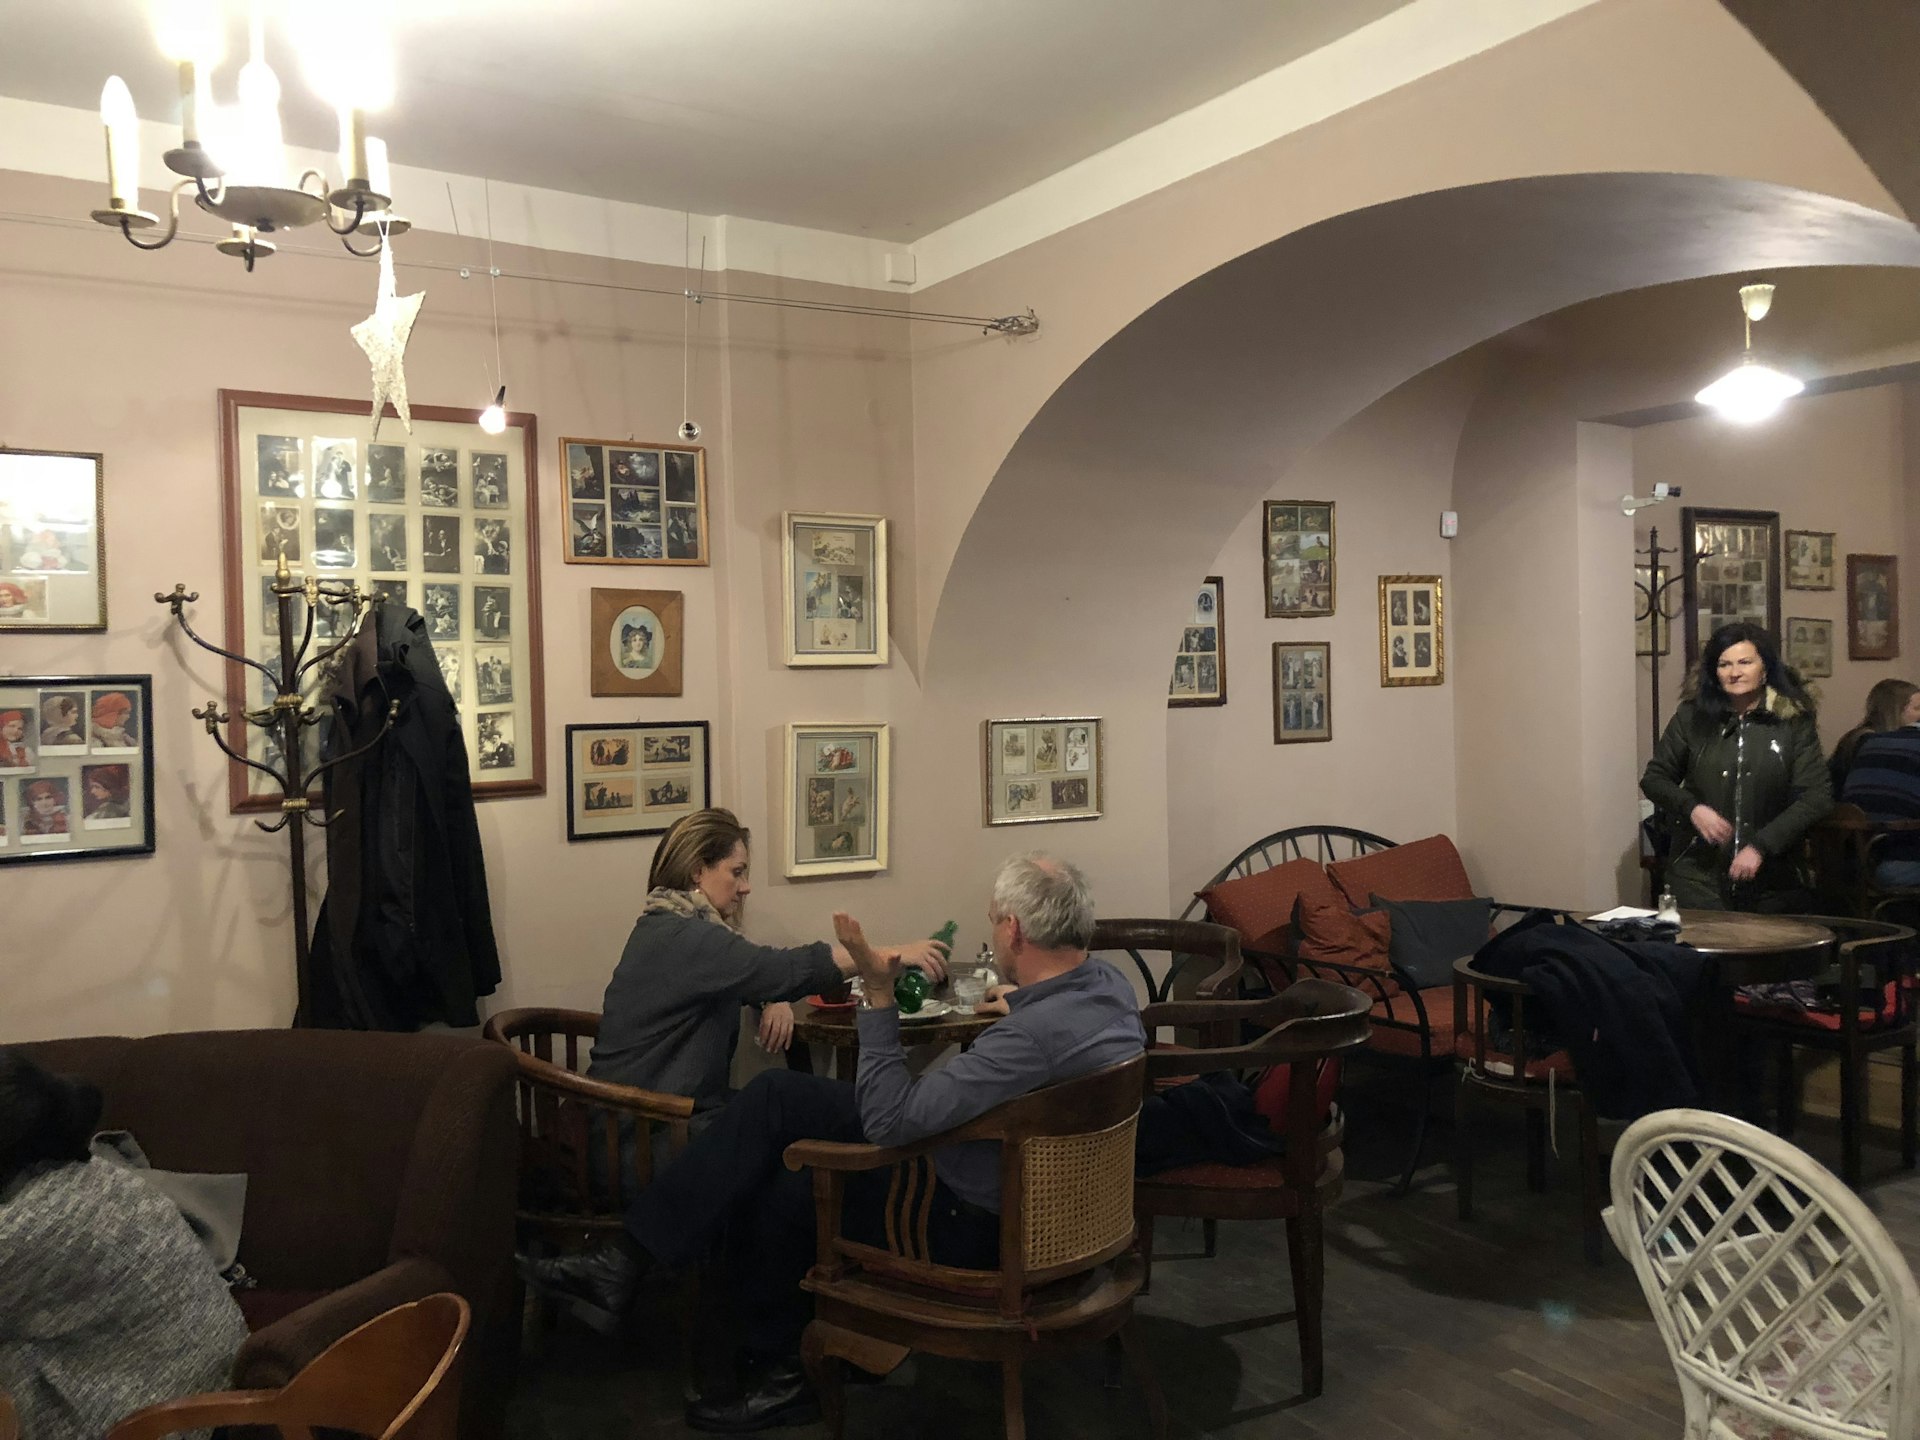 Customers sat in the Choco Cafe, Prague